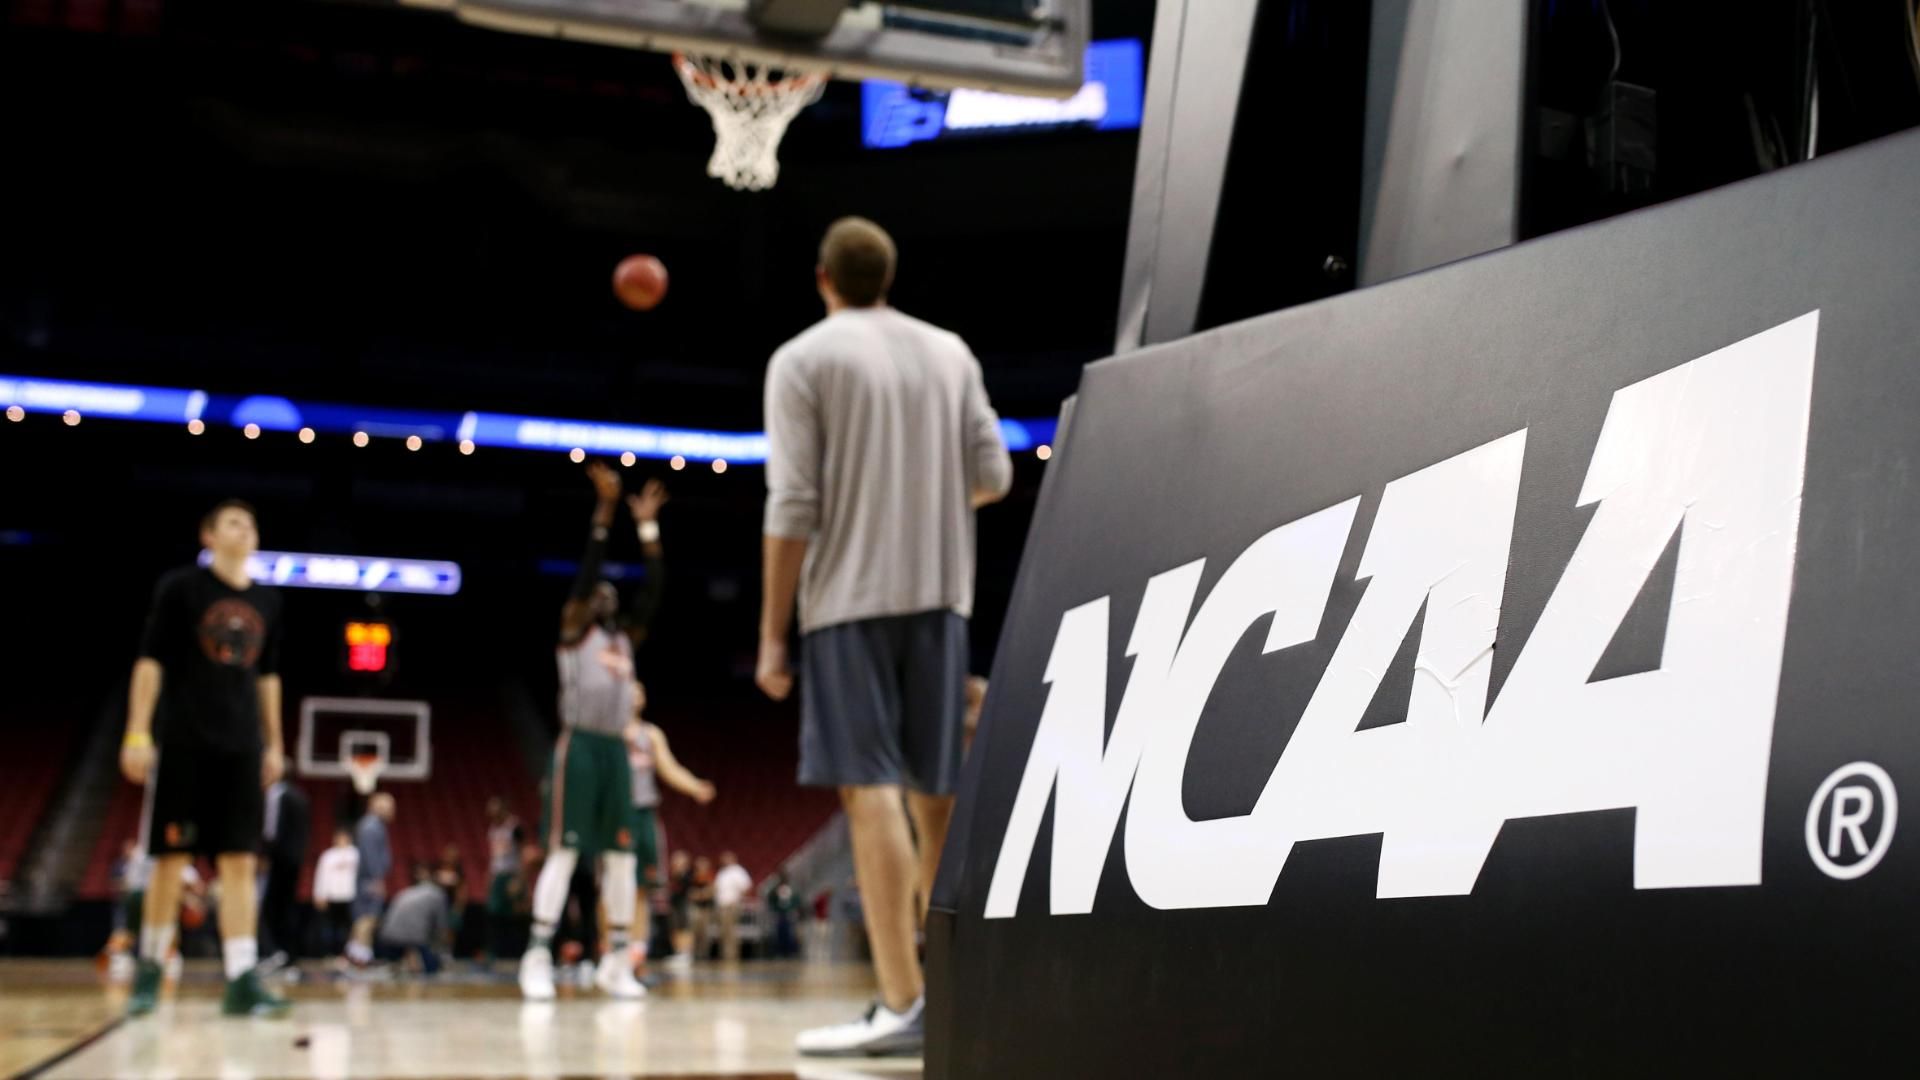 Players receiving benefits could impact college basketball immediately